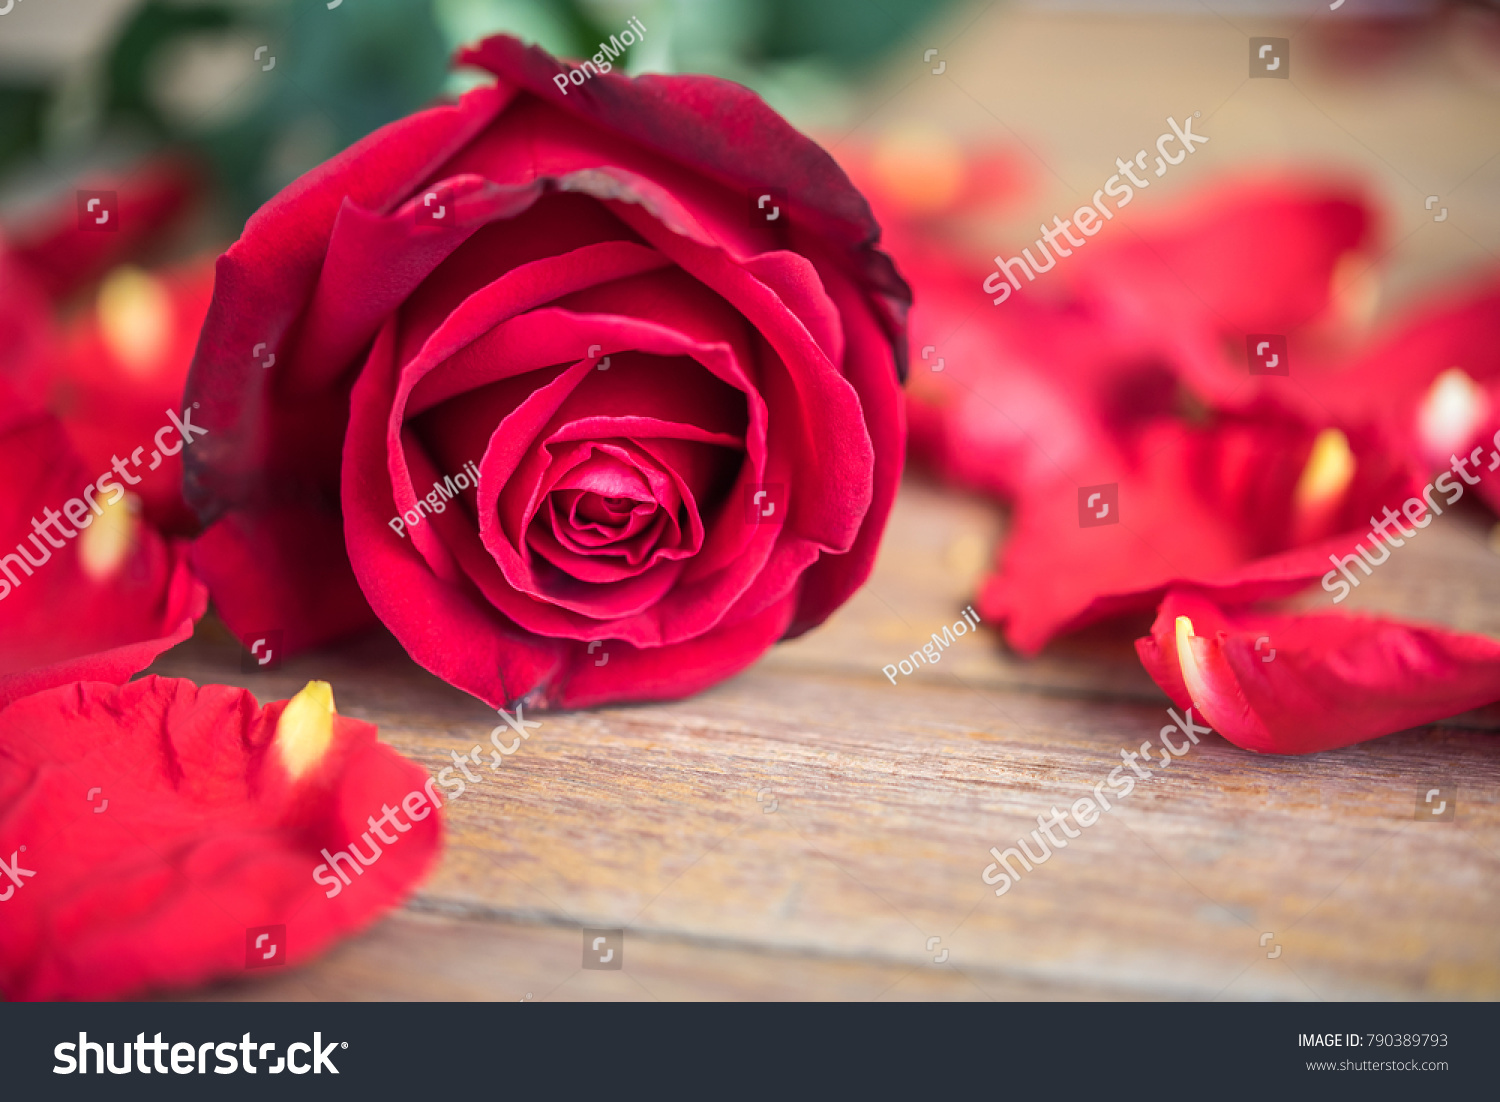 Red Rose Flower Nature Beautiful Flowers Stock Photo Edit Now